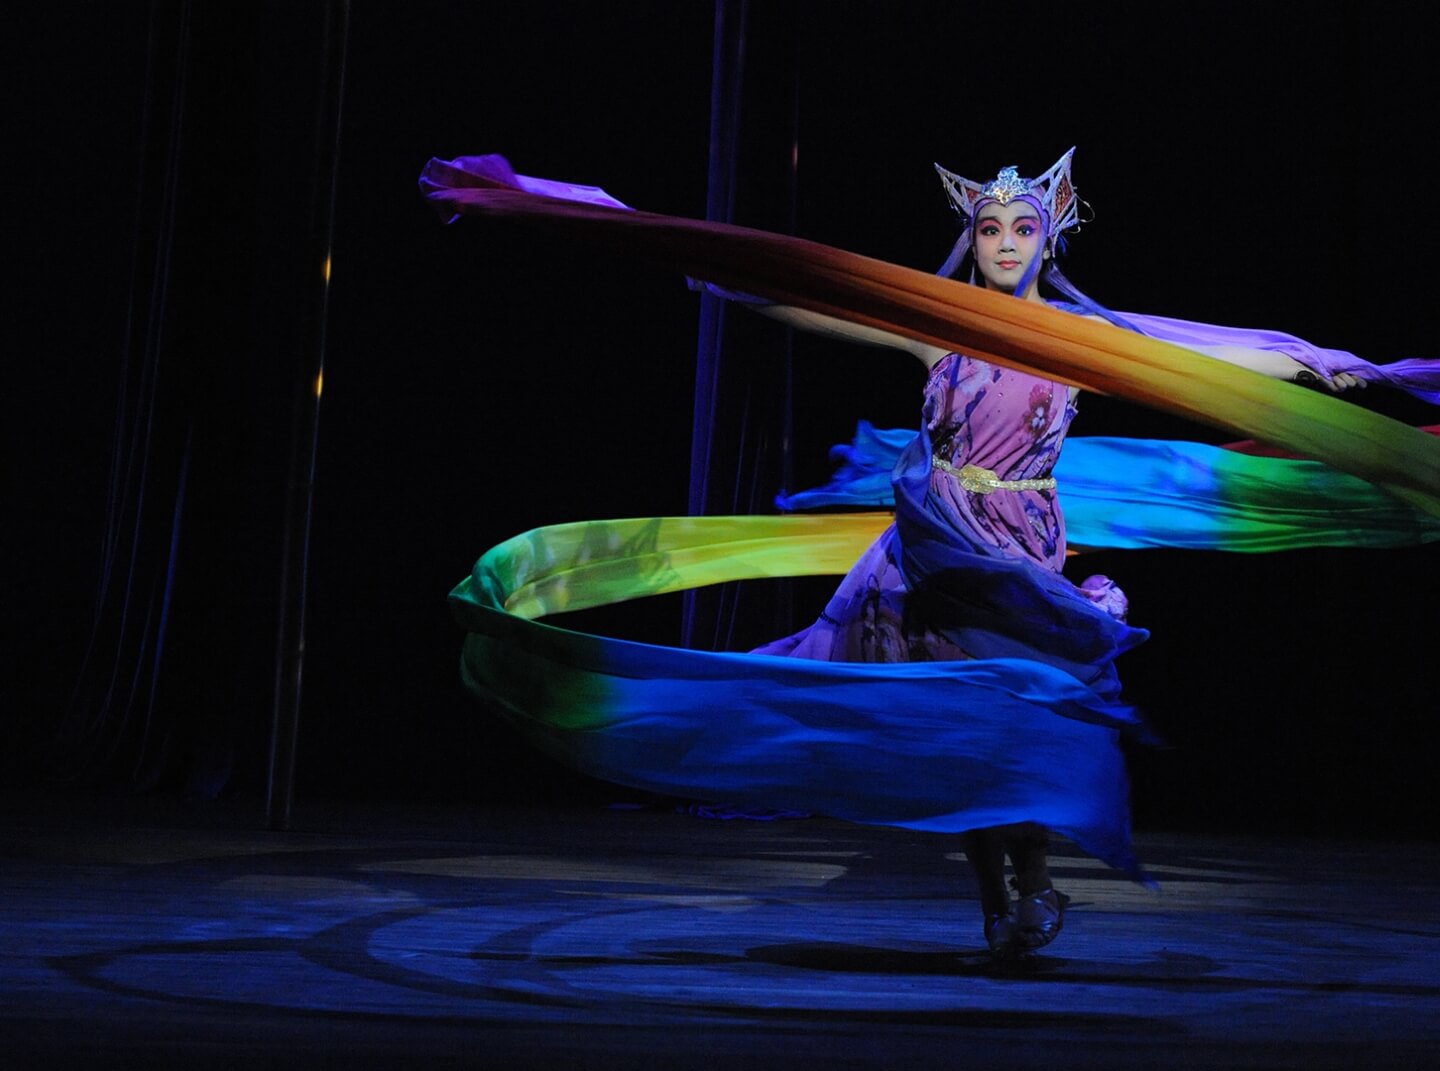 An elaborately costumed dancer twirls during a staged production, causing a long rainbow banner to billow outward into a spiral